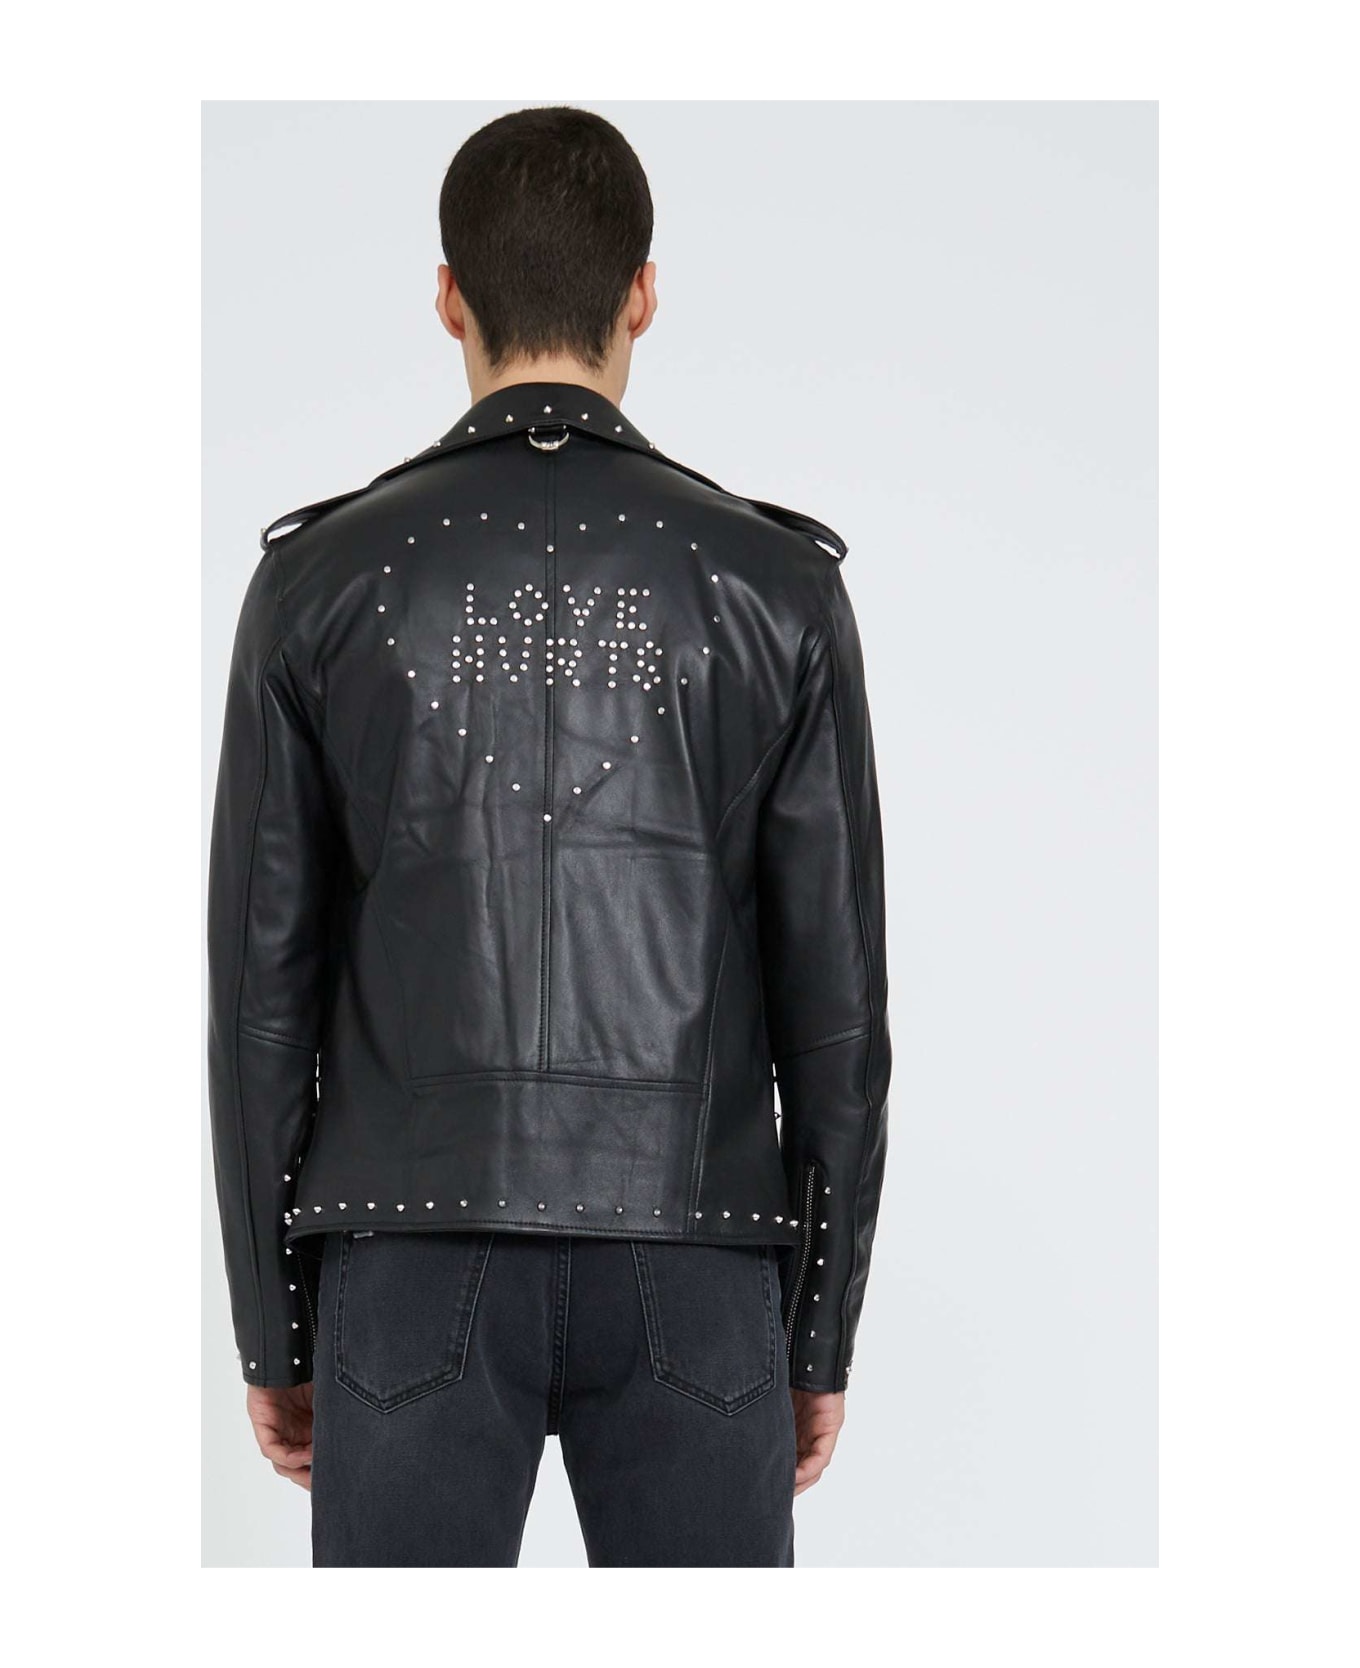 John Richmond Leather Jacket With Applications On The Back - Nero レザージャケット